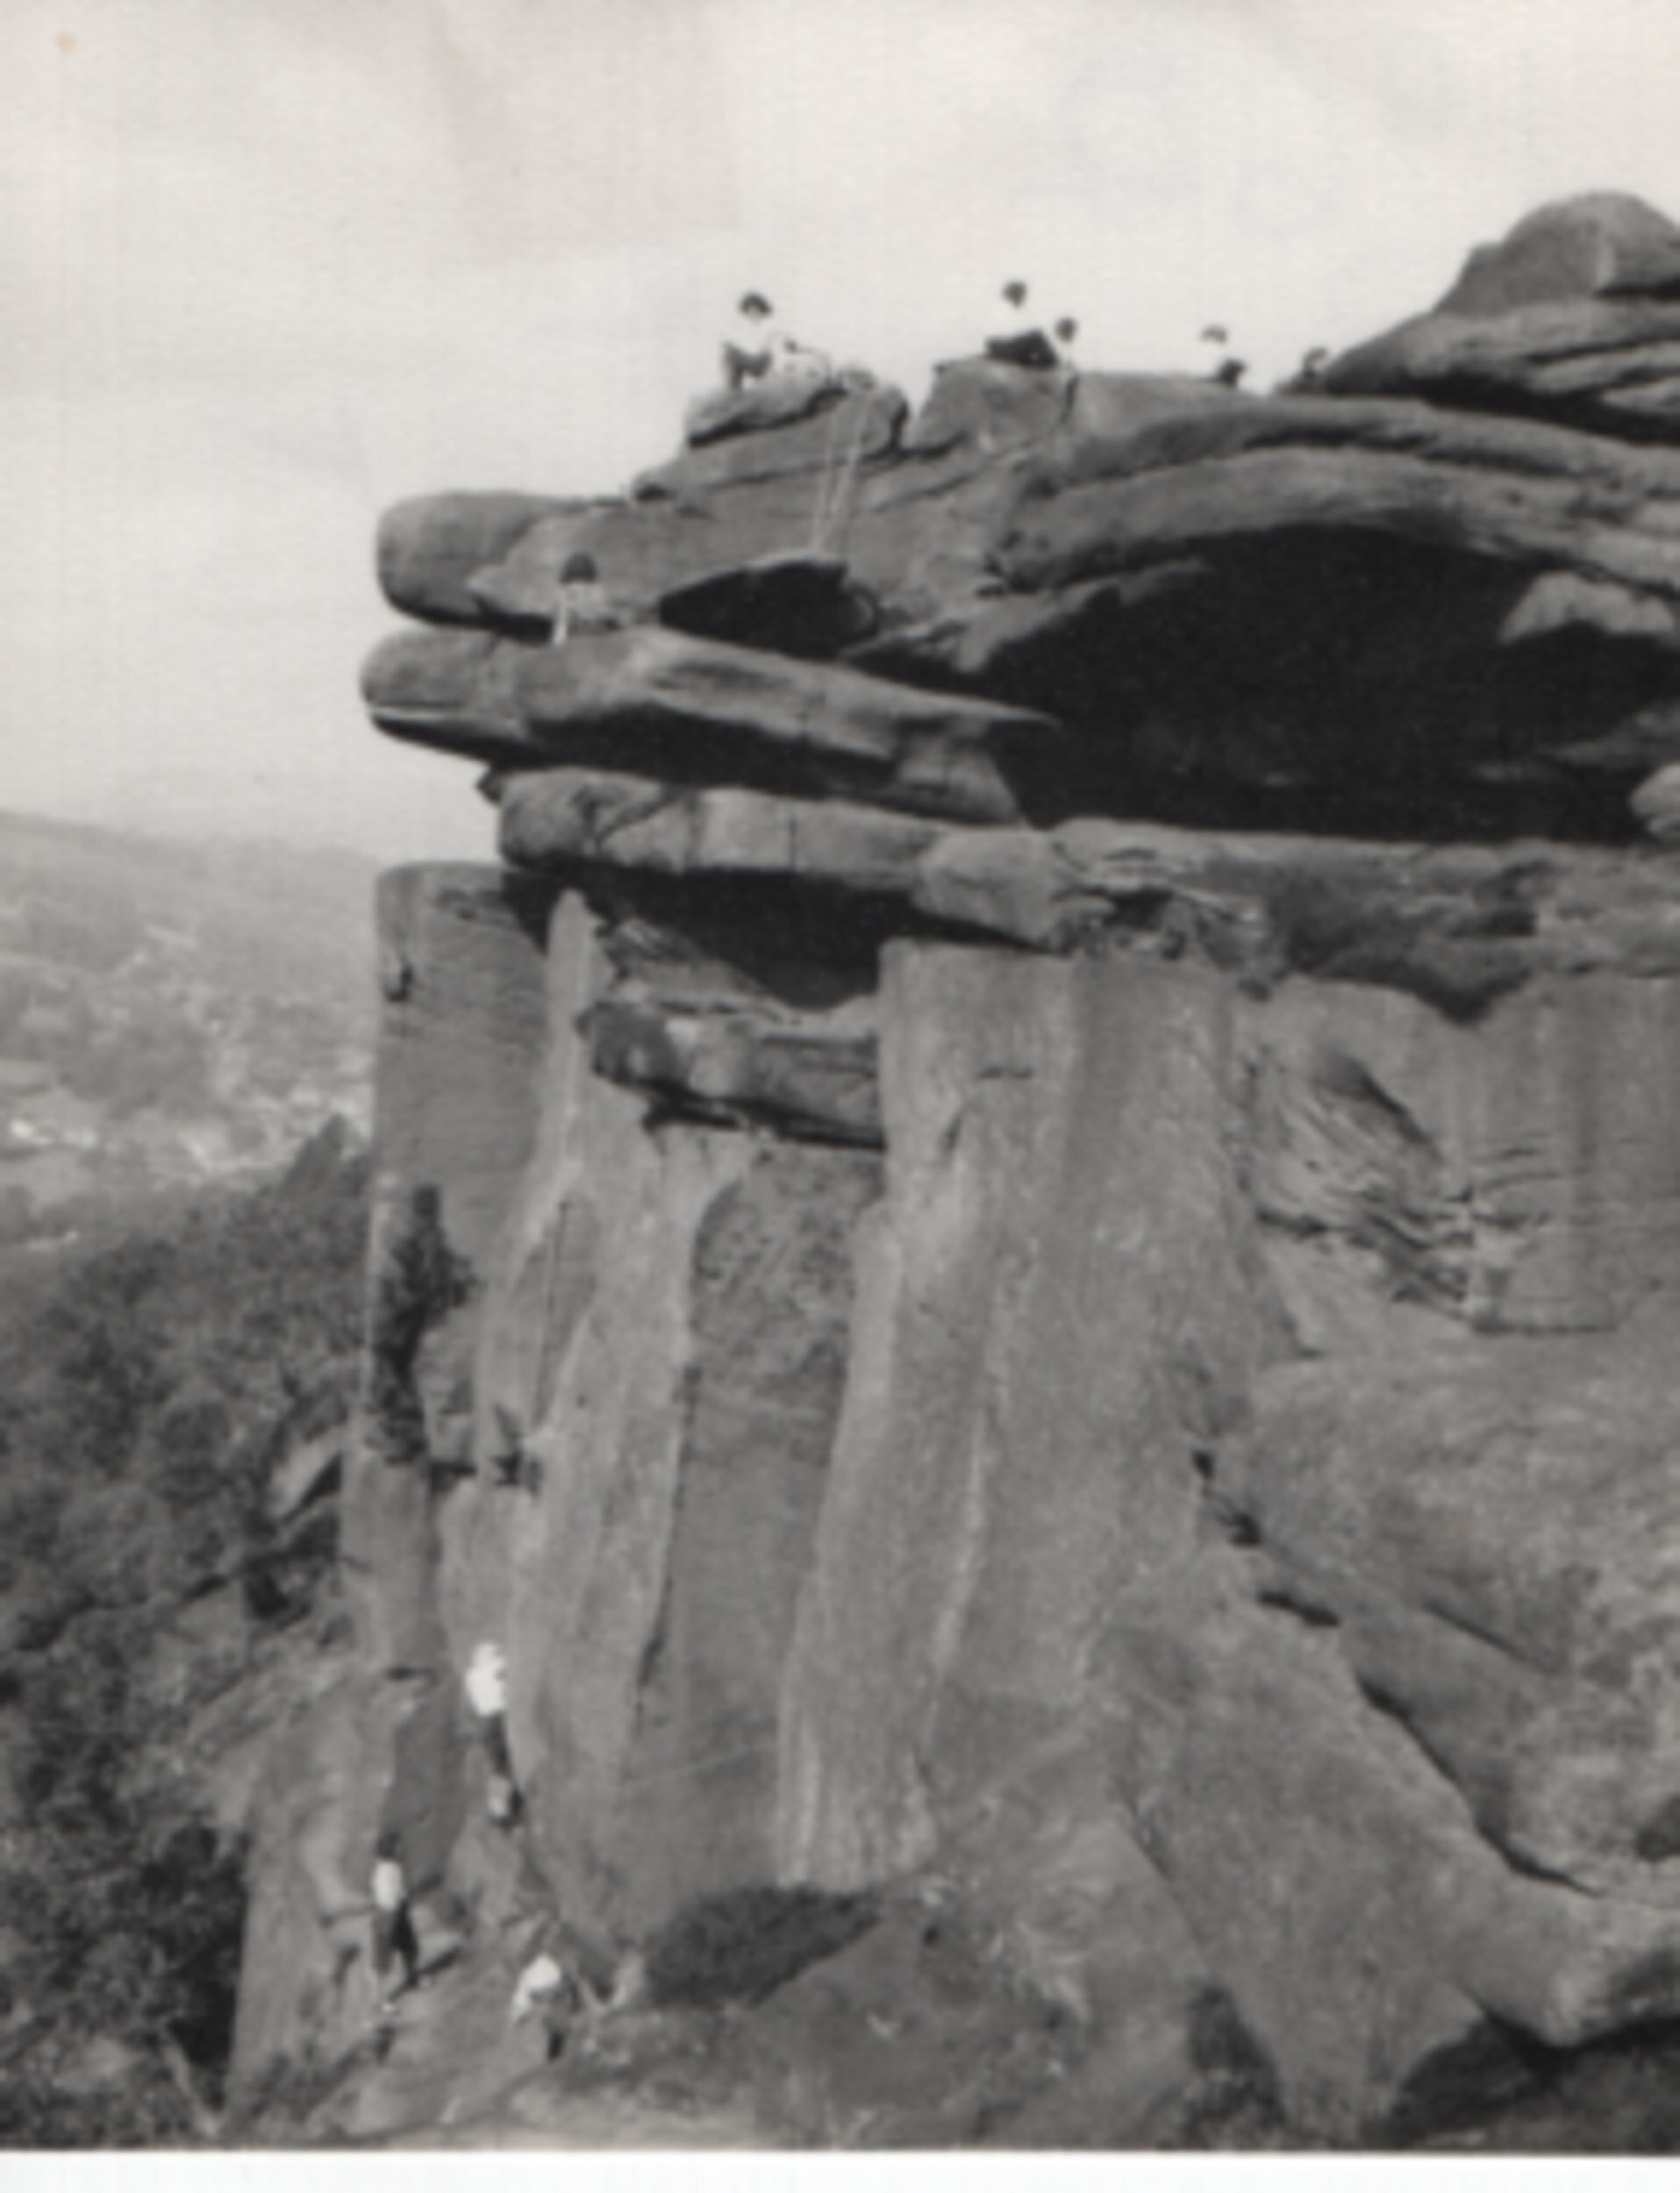 Nea Morin, Nancy Smith, Mary Fulford, Alwine Walford and Margaret Darvall at Froggatt, Peak District, in 1962